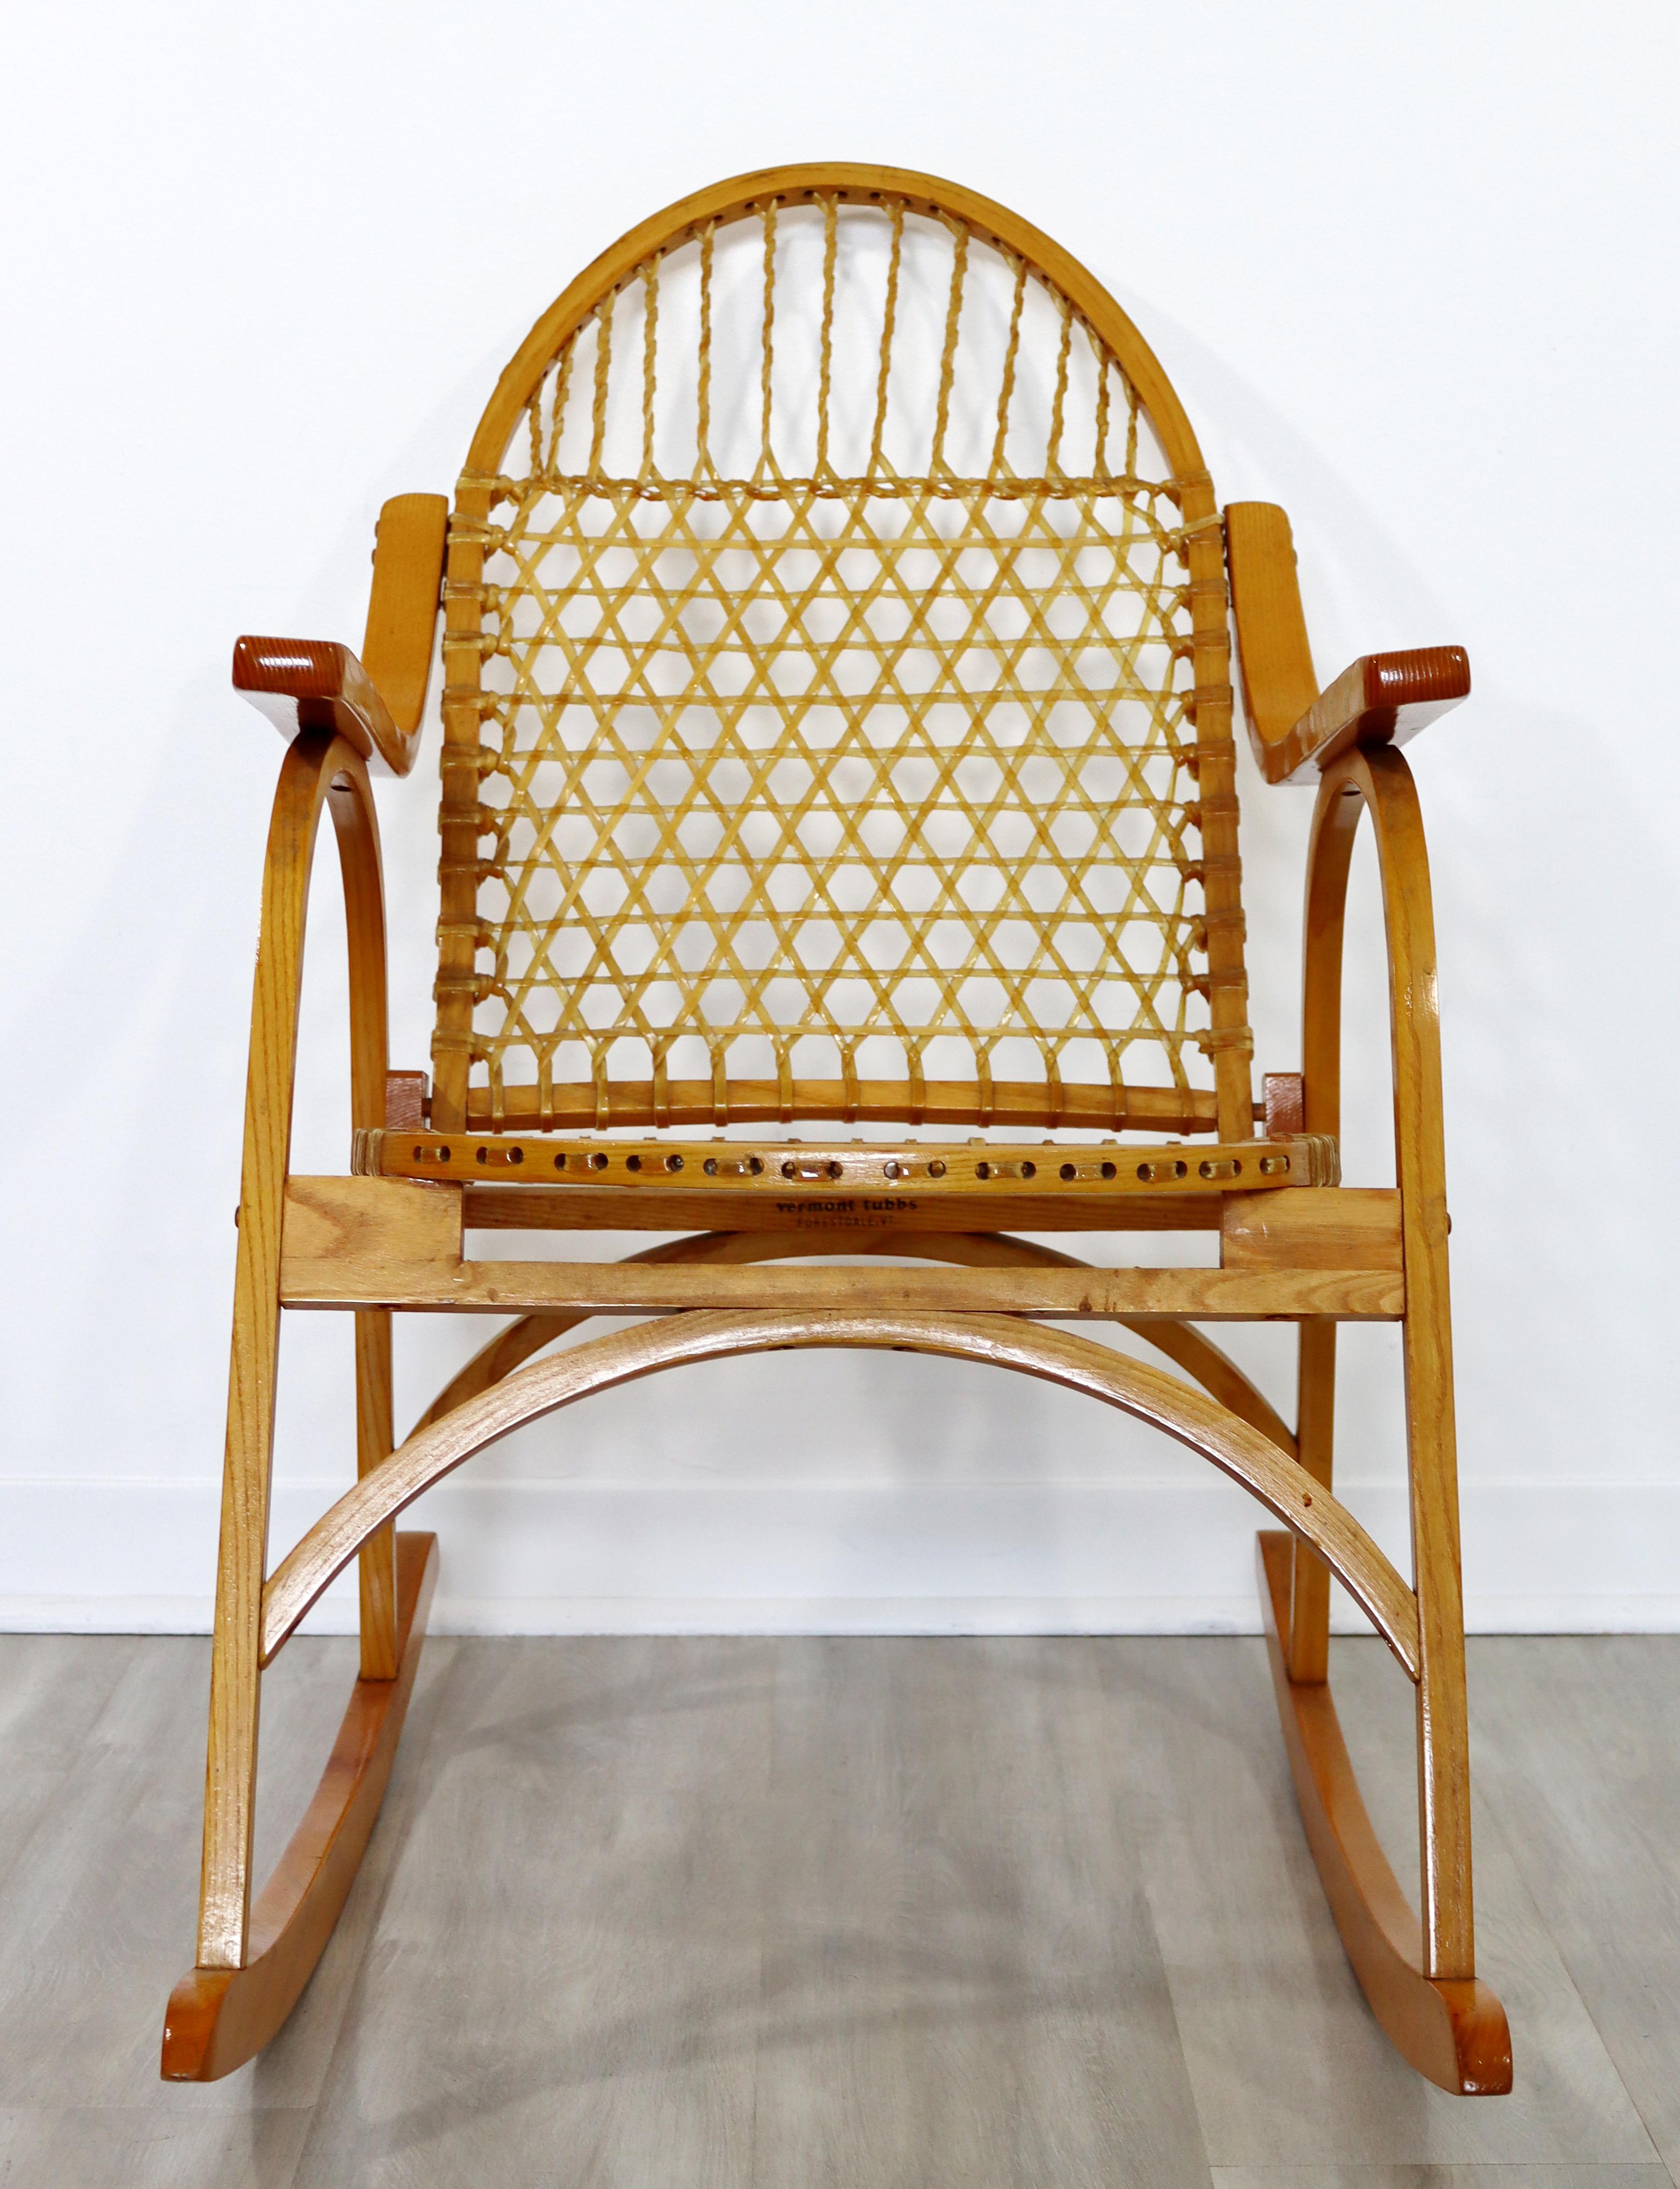 For your consideration is an eccentric accent rocking chair, with raw hide webbing, by Carl Koch for Vermont Tubbs, circa the 1950s. In excellent vintage condition. The dimensions are 20.5